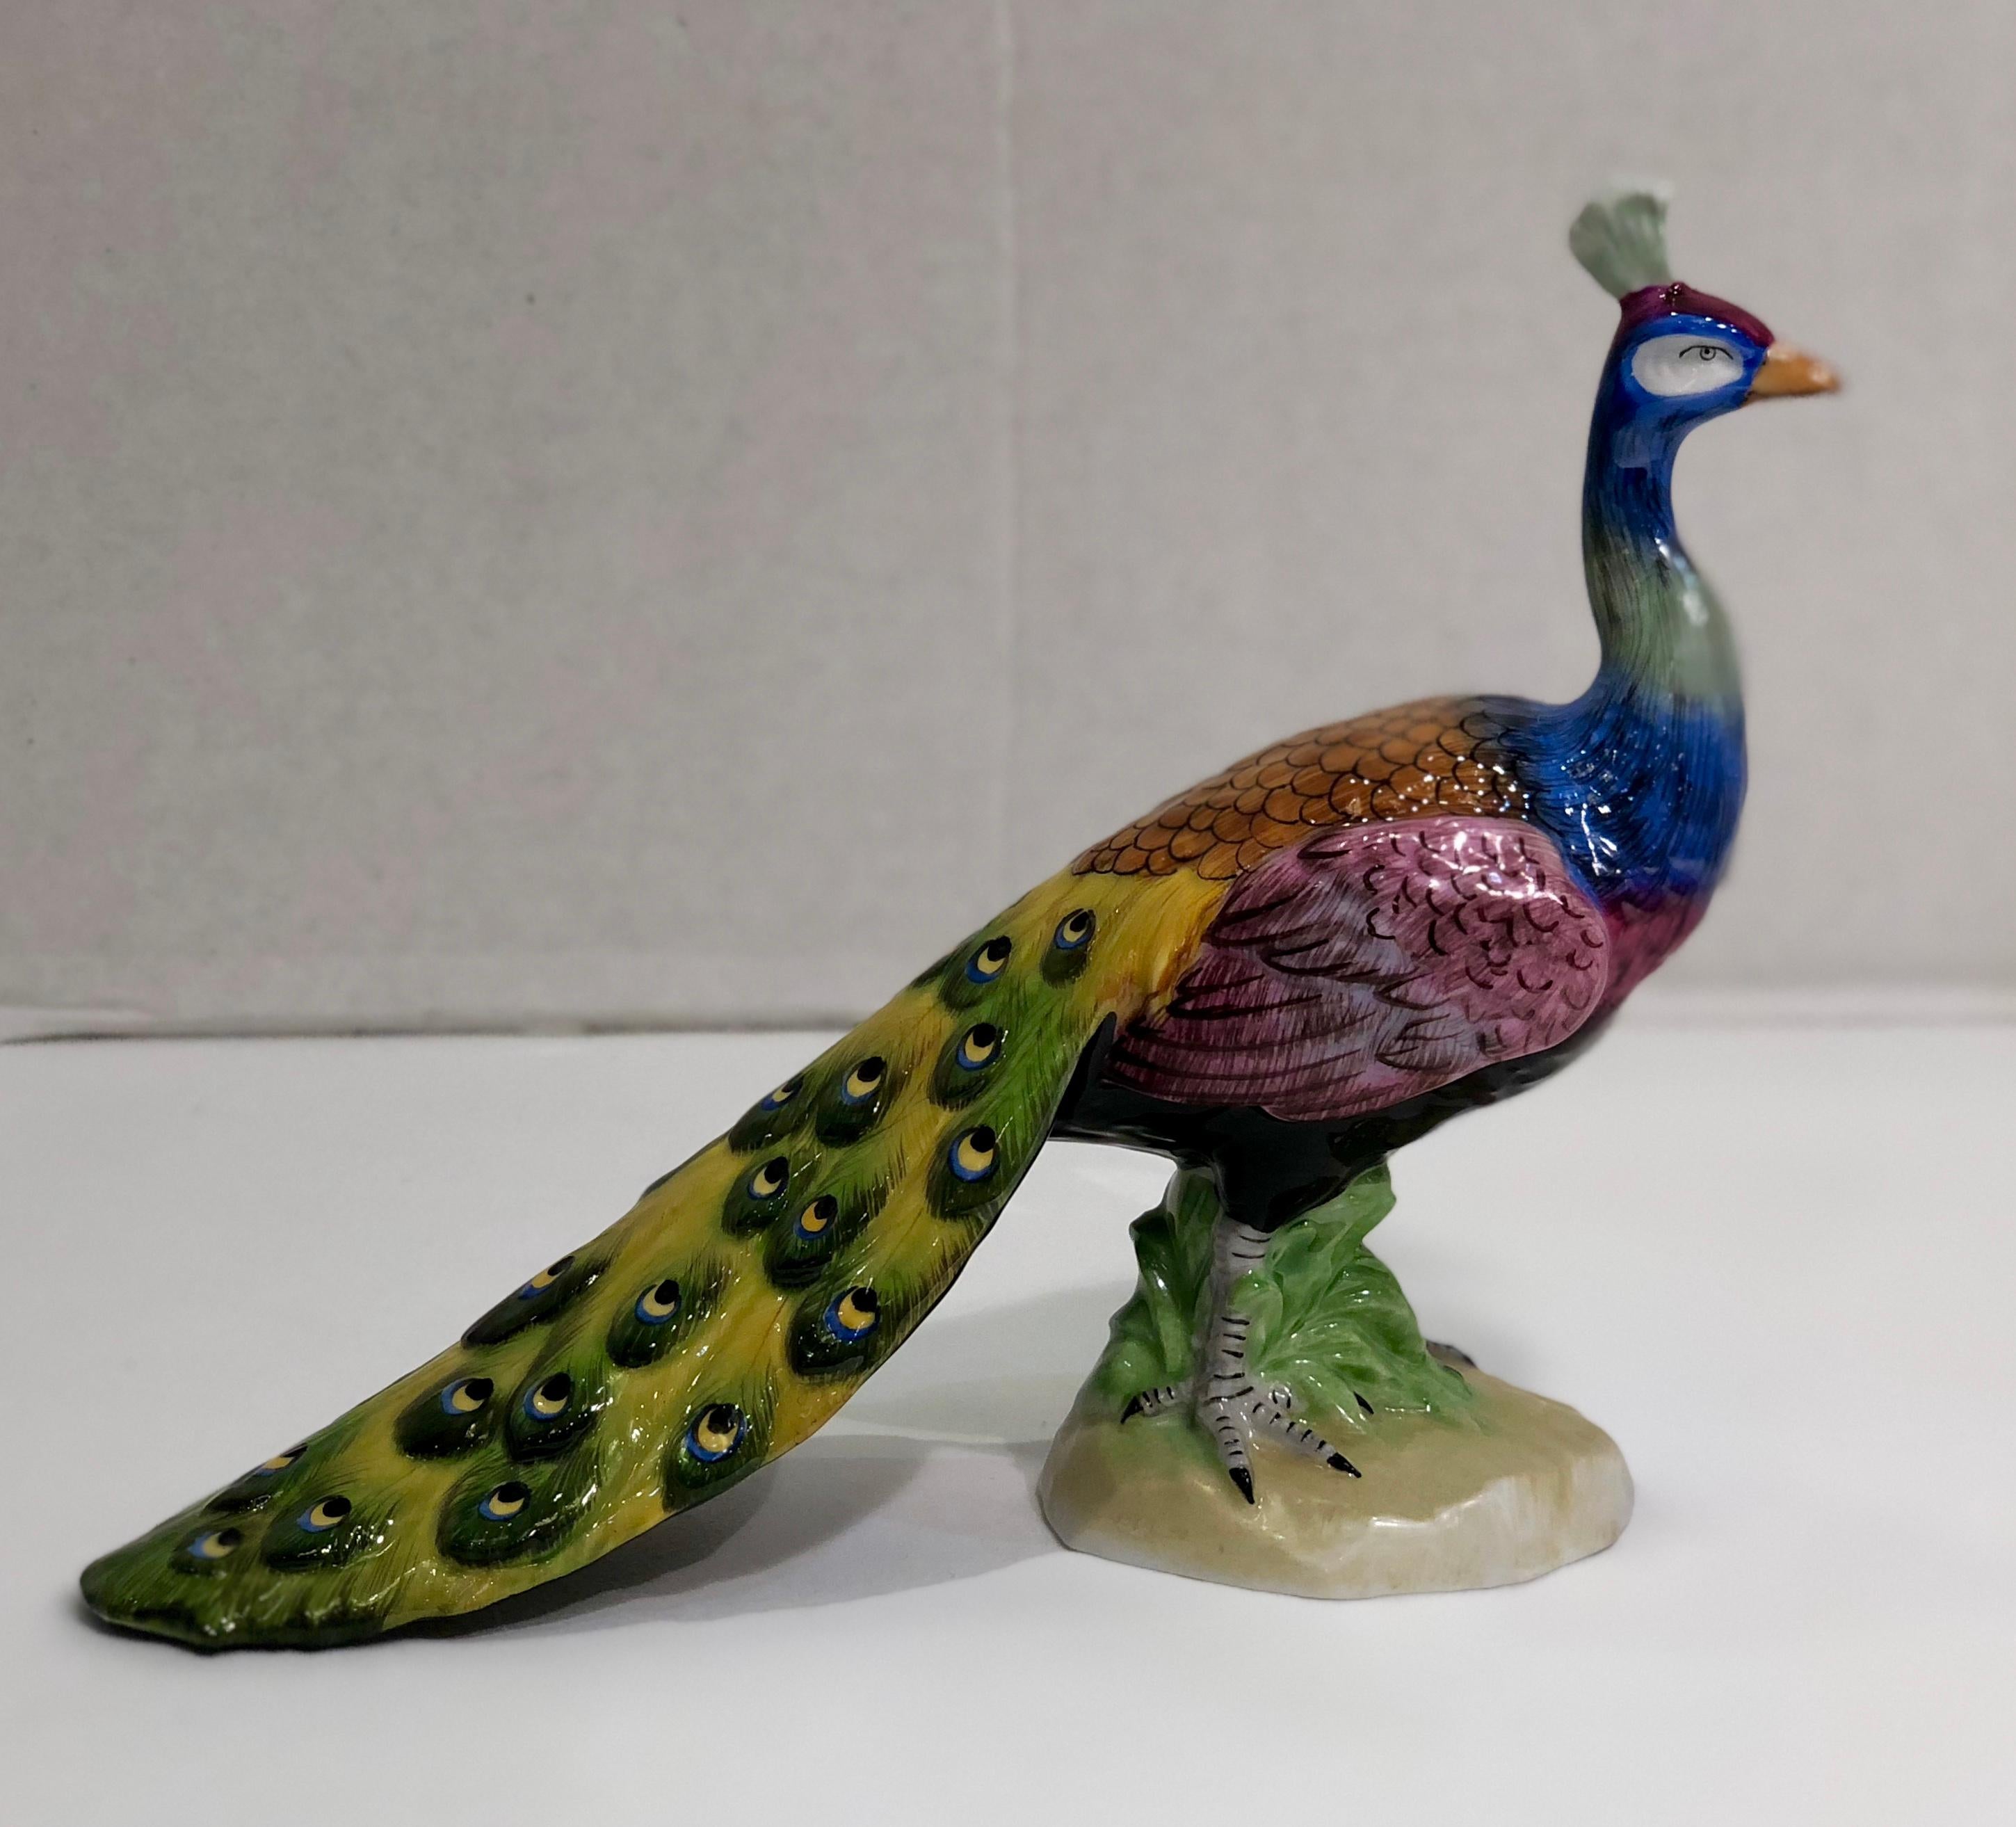 Exquisite Dresden Porcelain Peacock Tail Closed Facing Forward Figurine Germany For Sale 2